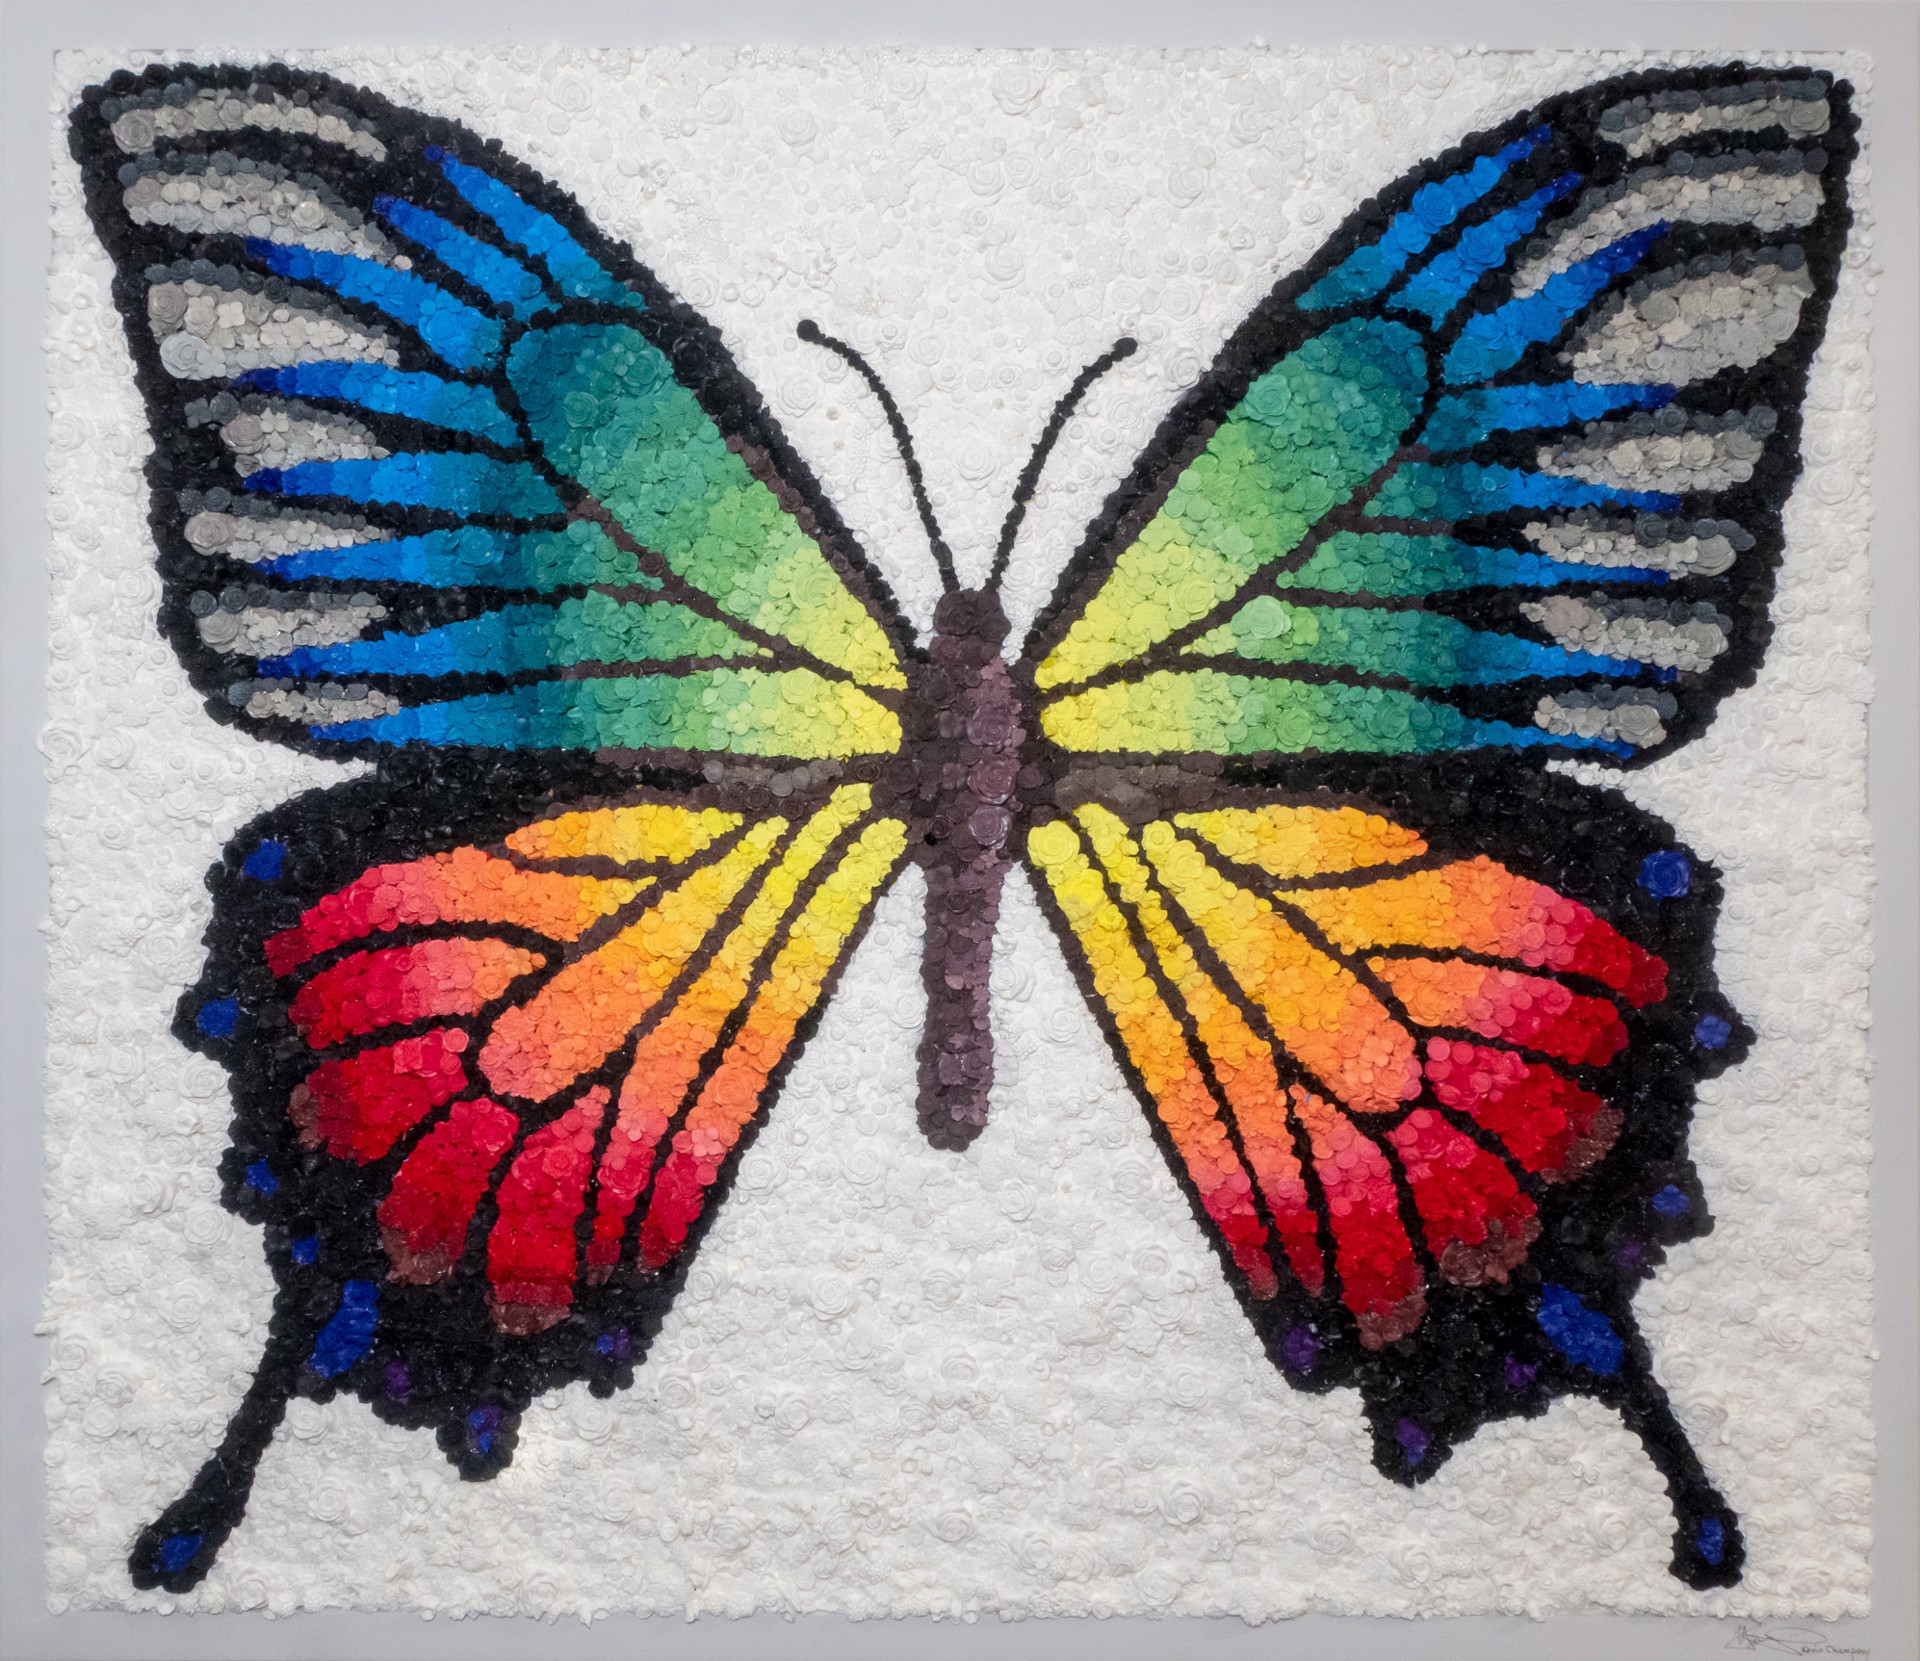 Tethered Butterfly Rainbow by Kevin Champeny